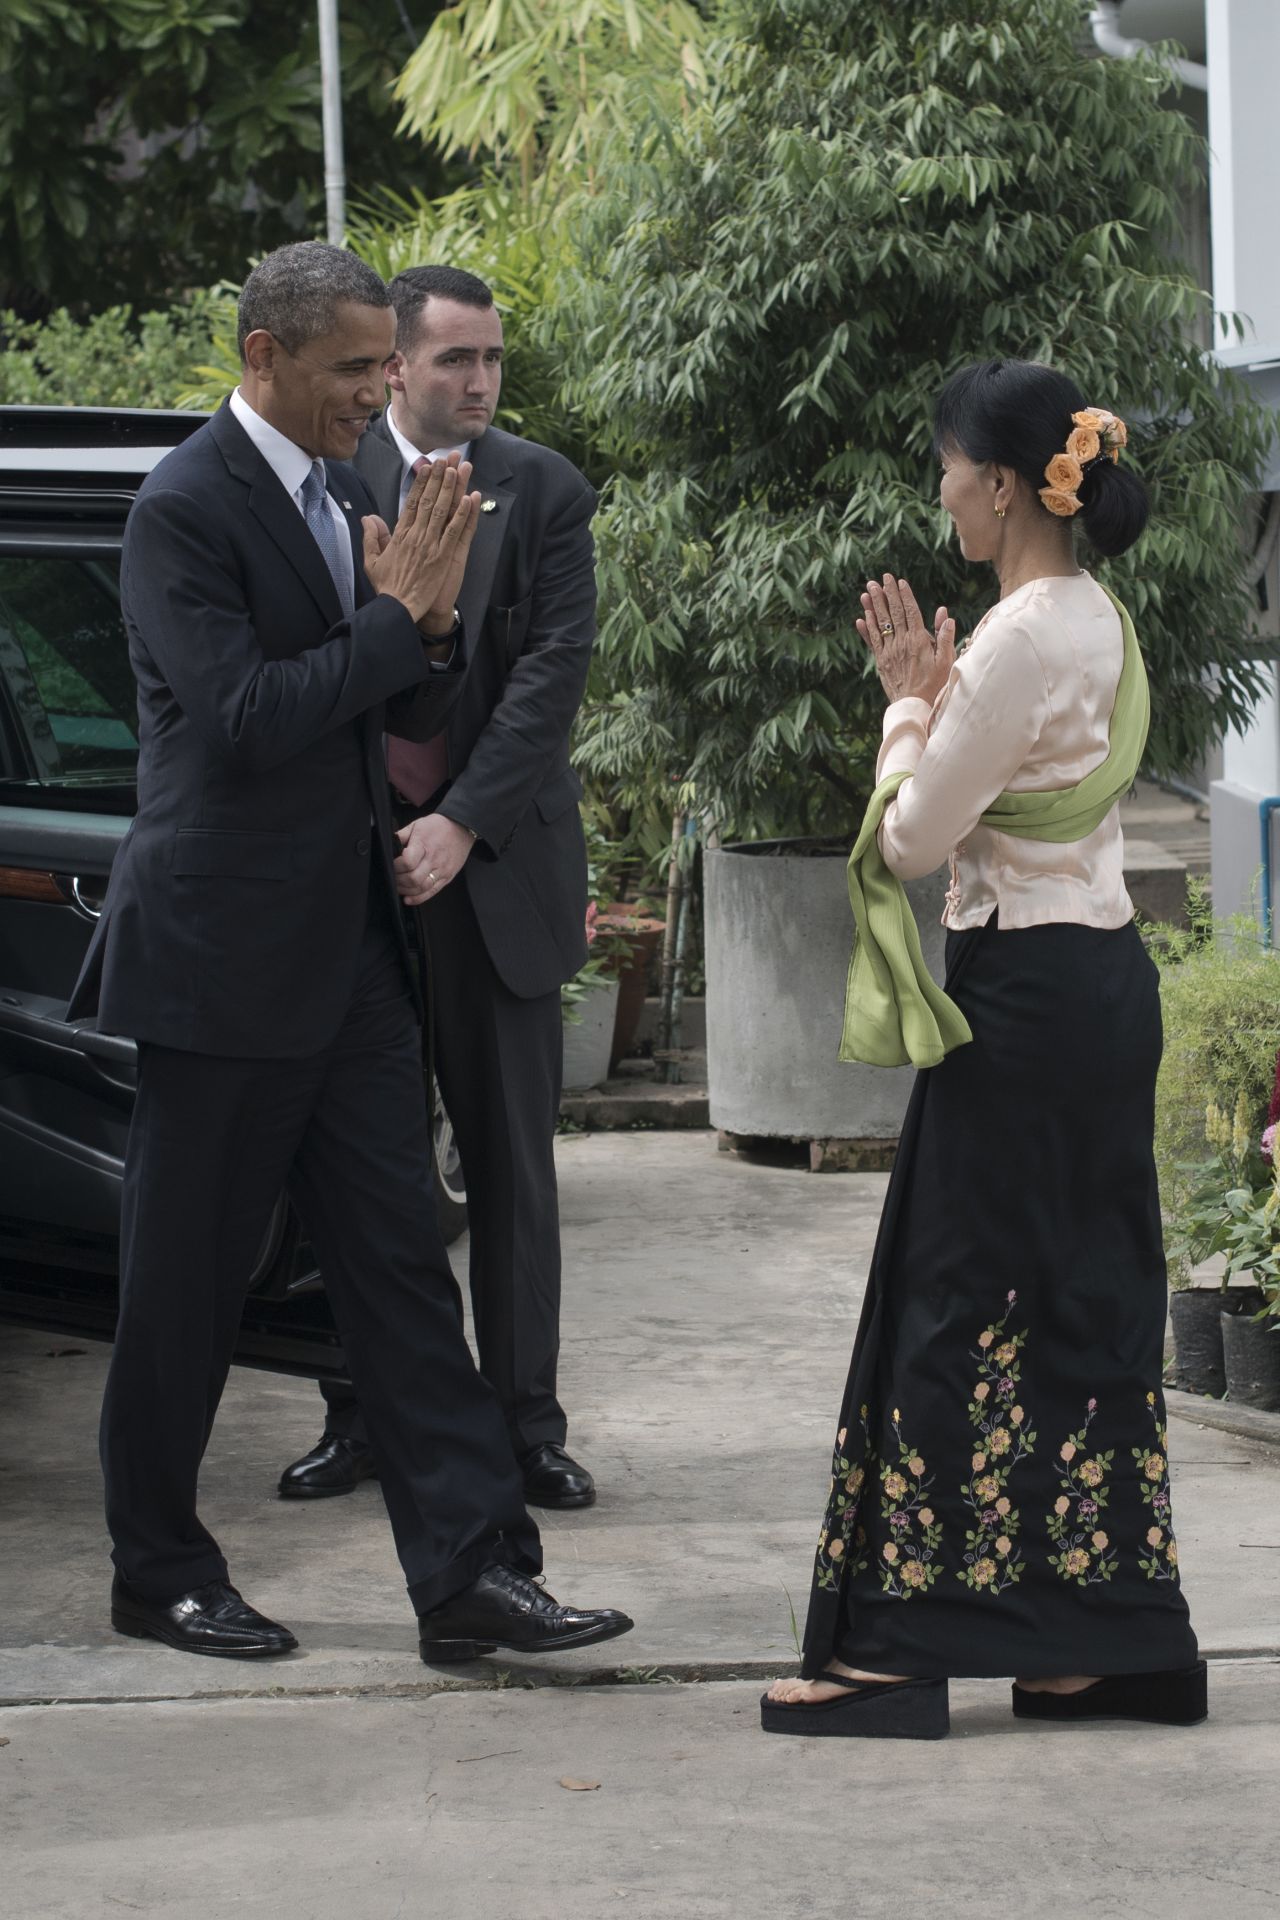 U.S. President Obama  is greeted by Myanmar pro-democracy leader Aung San Suu Kyi at her residence in Yangon on Monday.